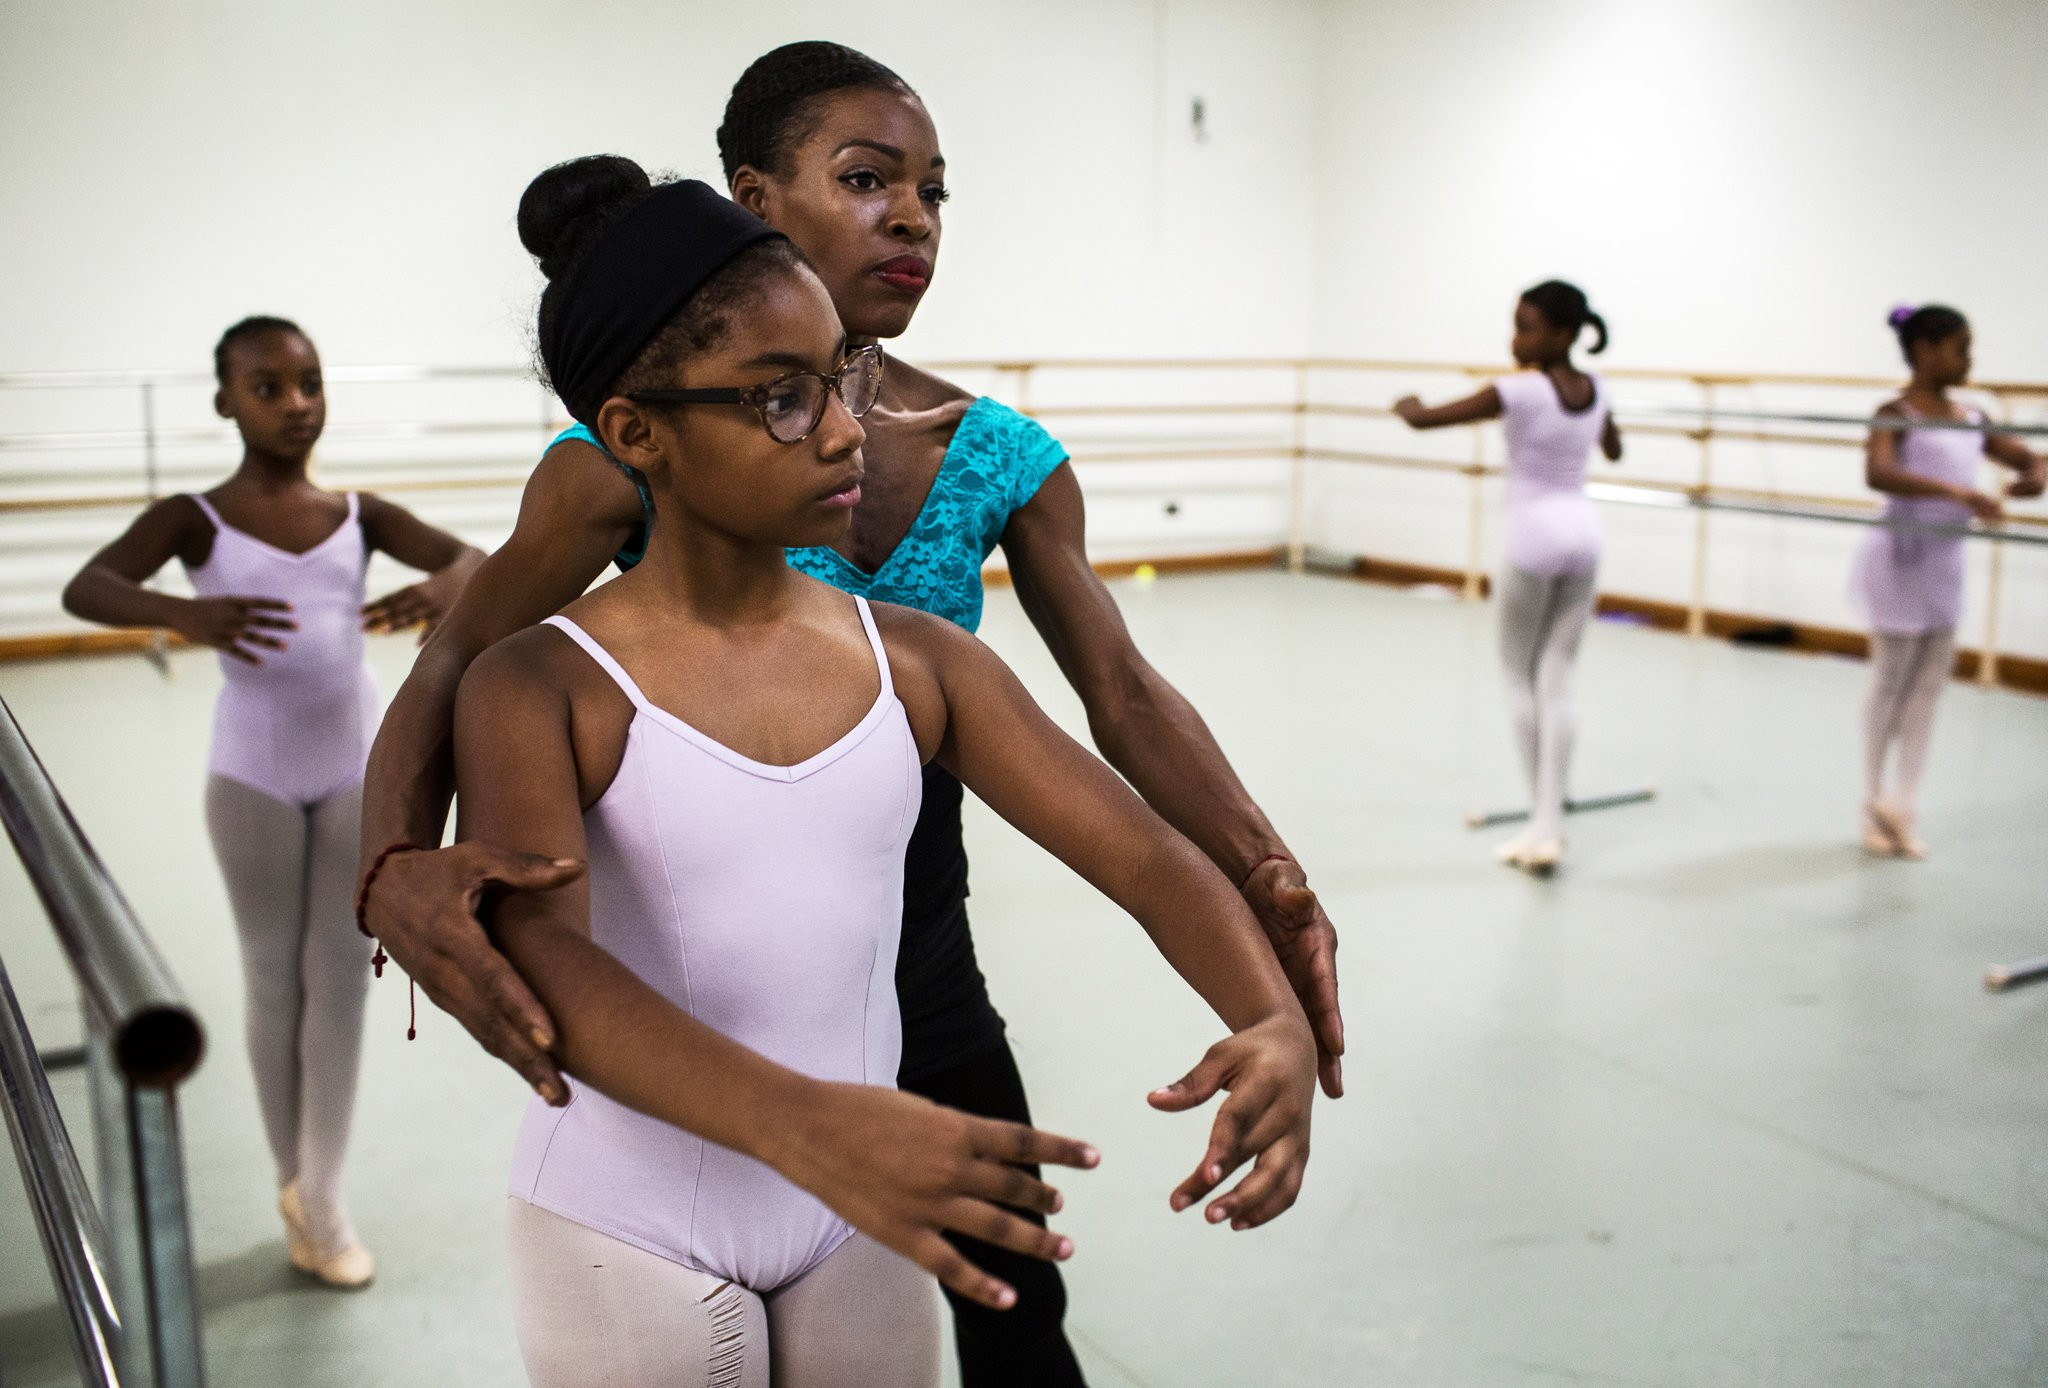 HARLEM SCHOOL OF THE ARTS, ONCE SHUTTERED AND IN DEBT, NOW DREAMS BIG